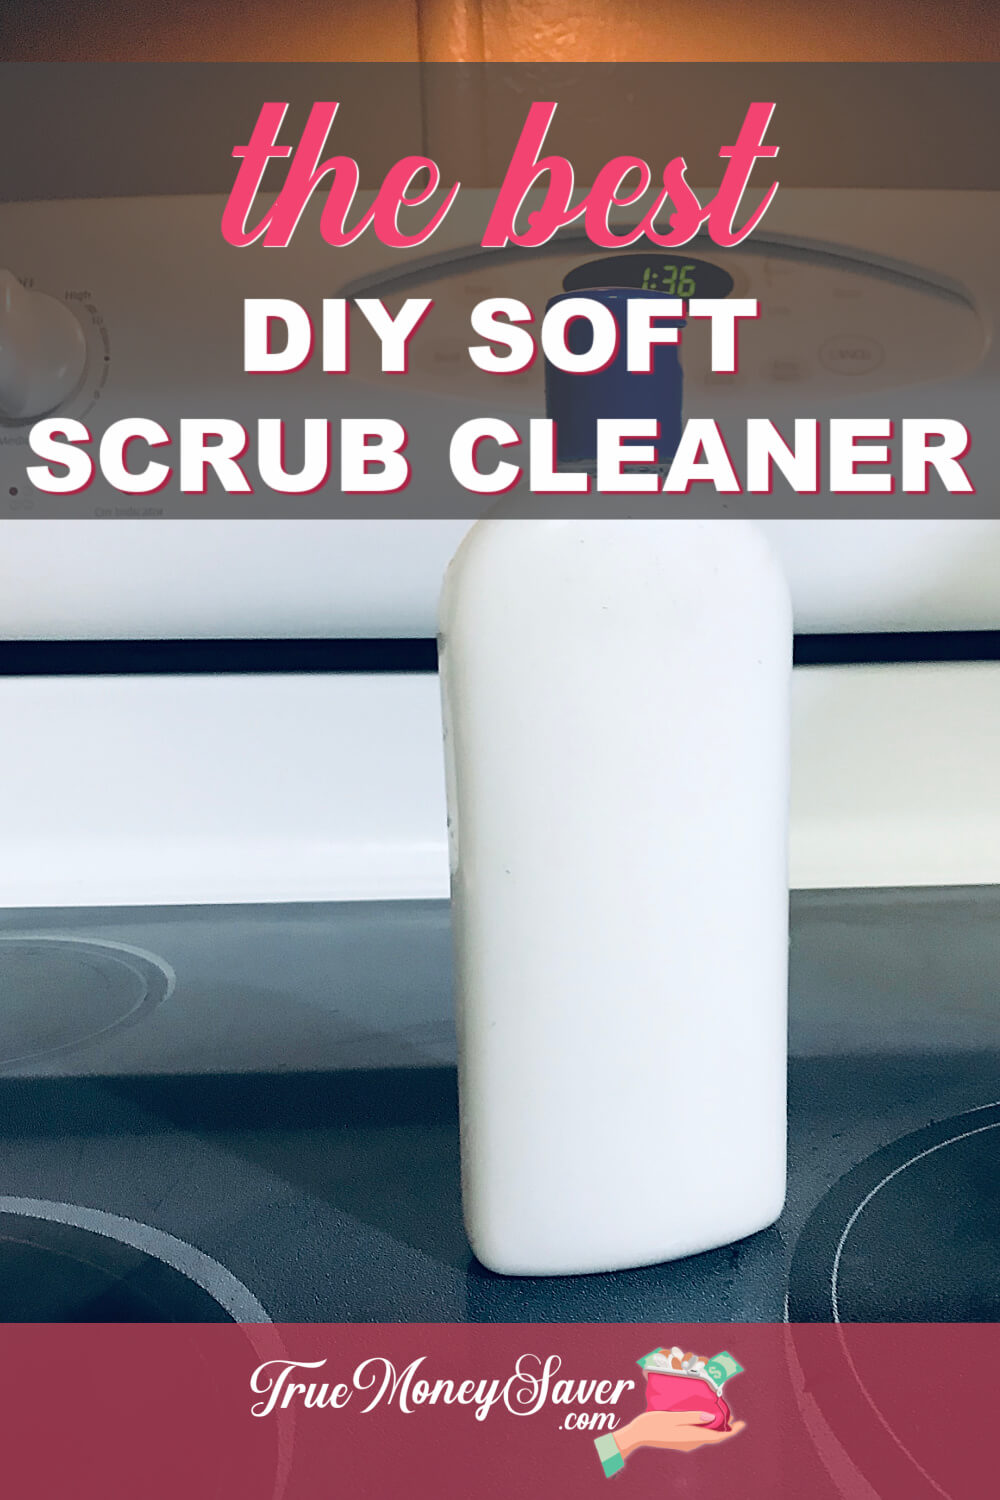 The Best Soft Scrub Cleaner You Can Make Today